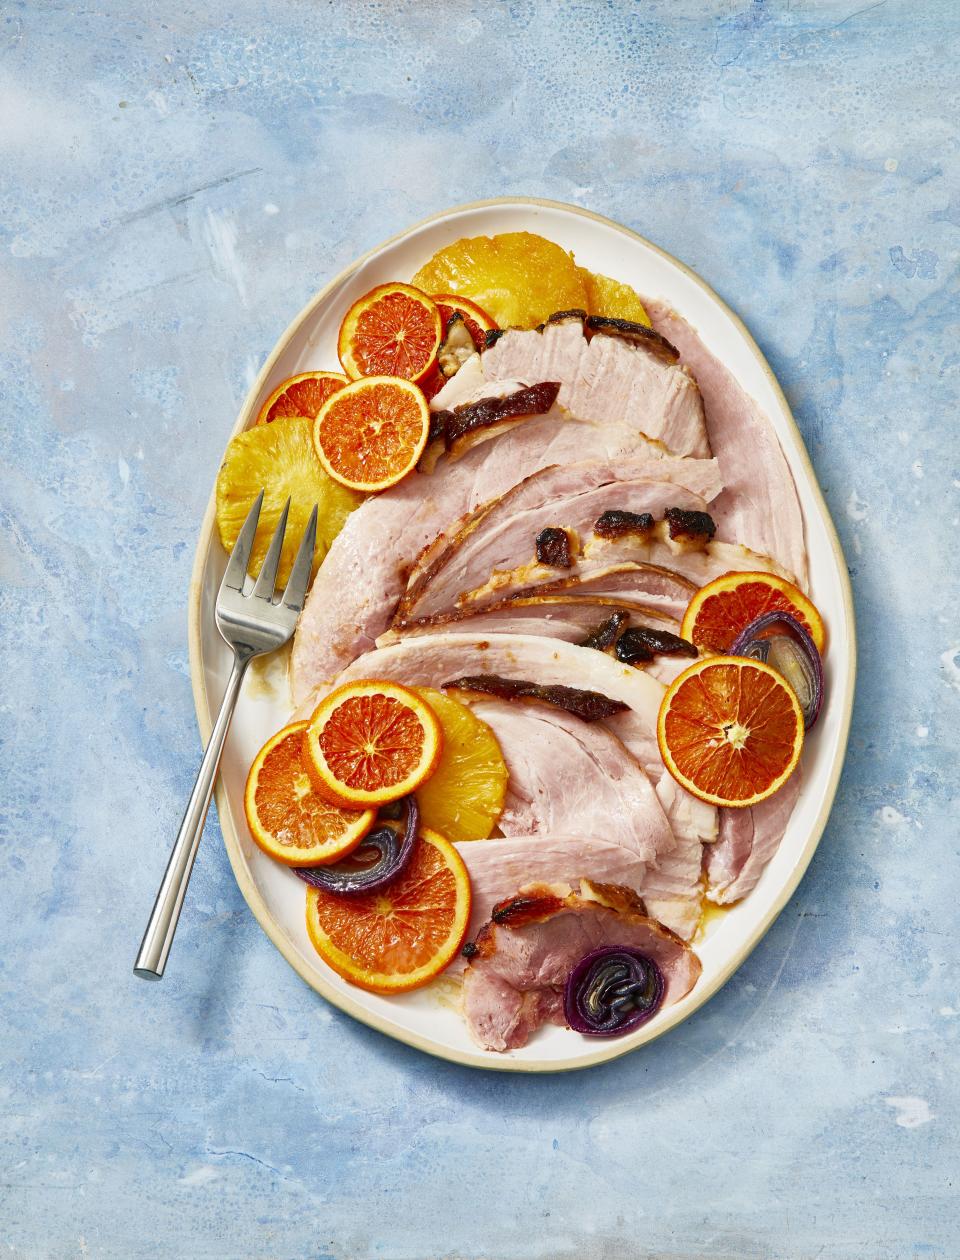 Pineapple-Glazed Ham Is the Way to Our Hearts This Easter